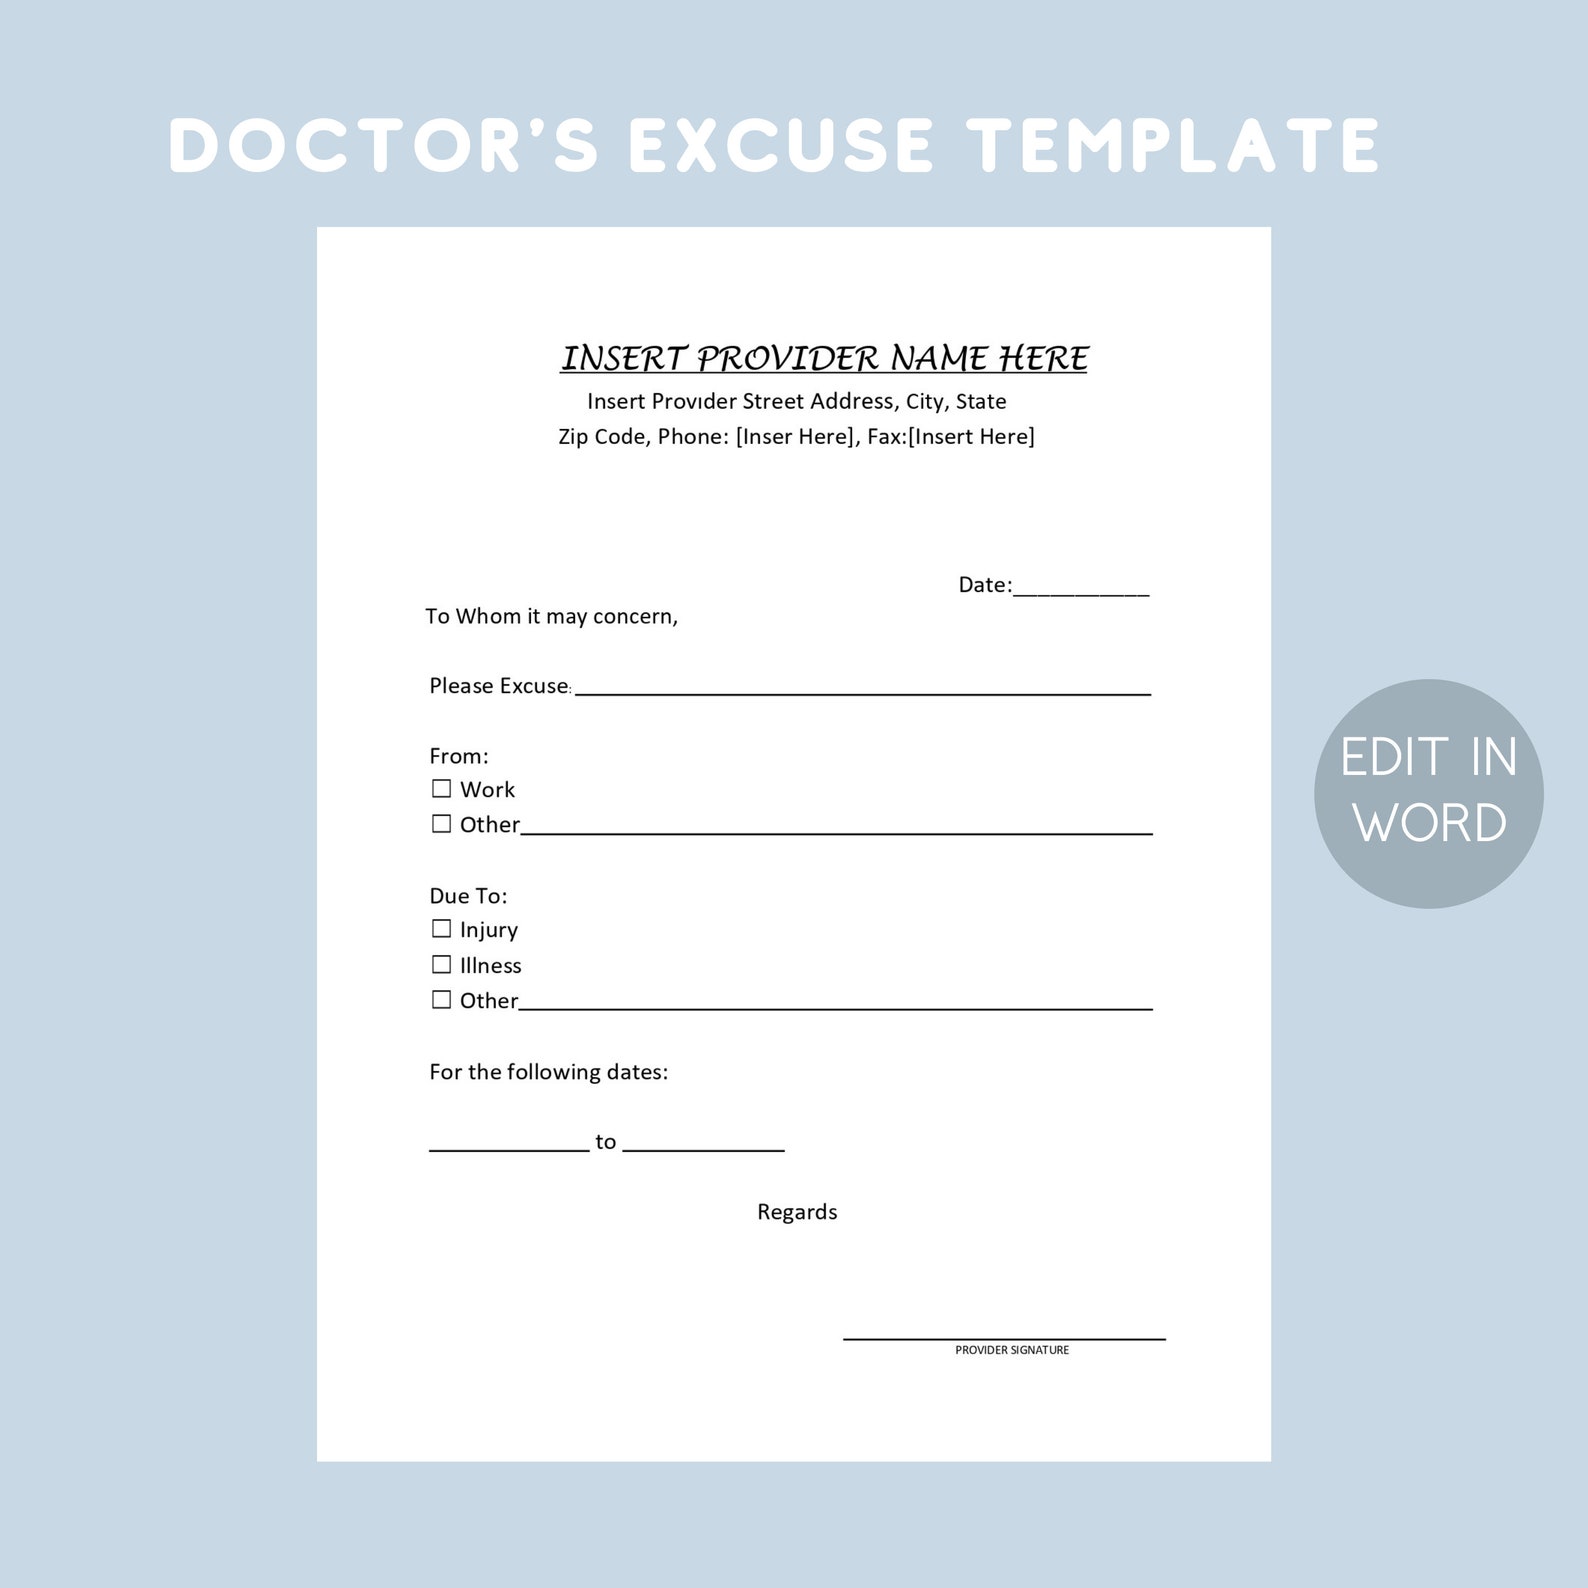 printable-doctors-excuse-template-editable-medical-office-forms-work